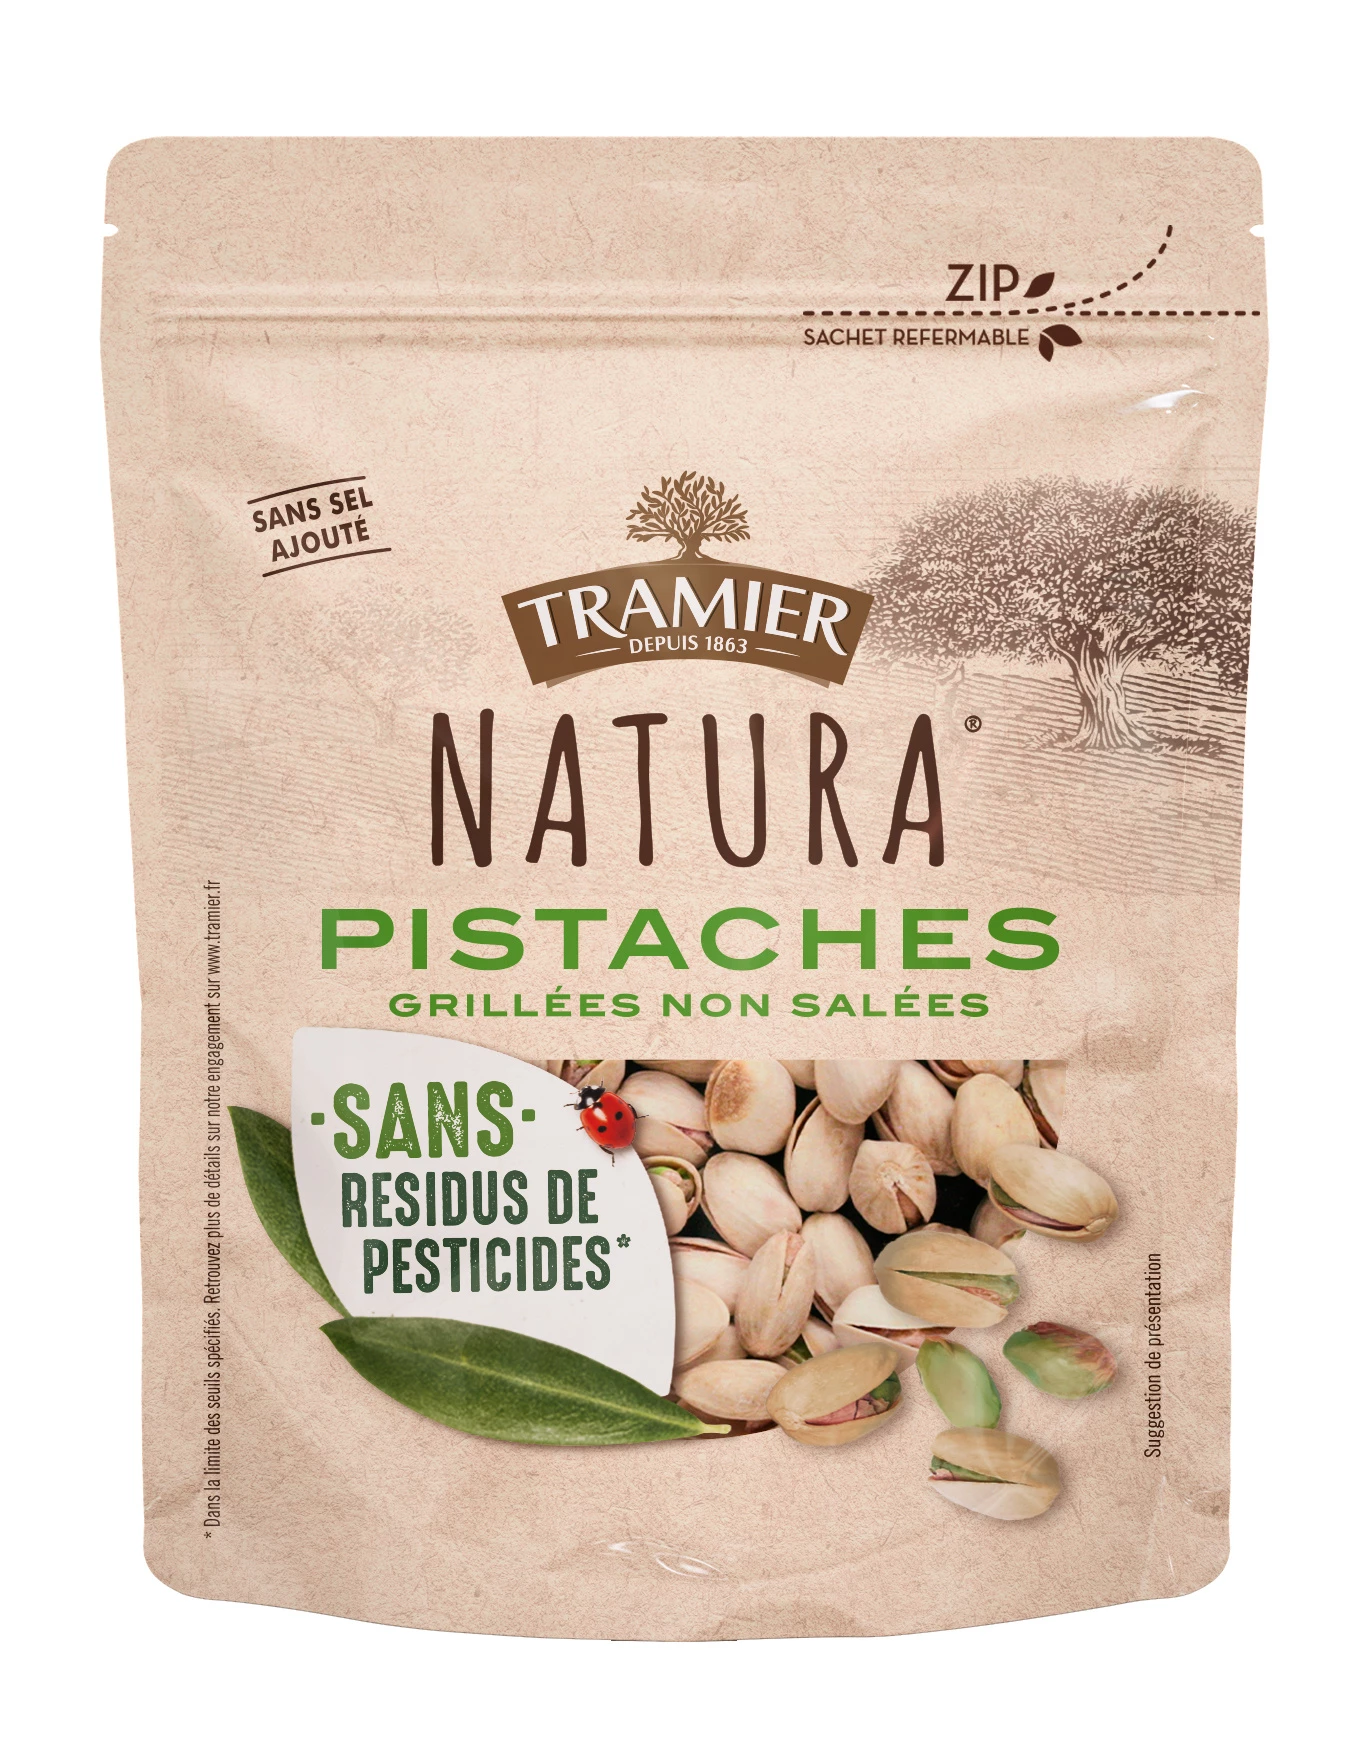 Roasted Unsalted Pistachios, 160g - TRAMIER